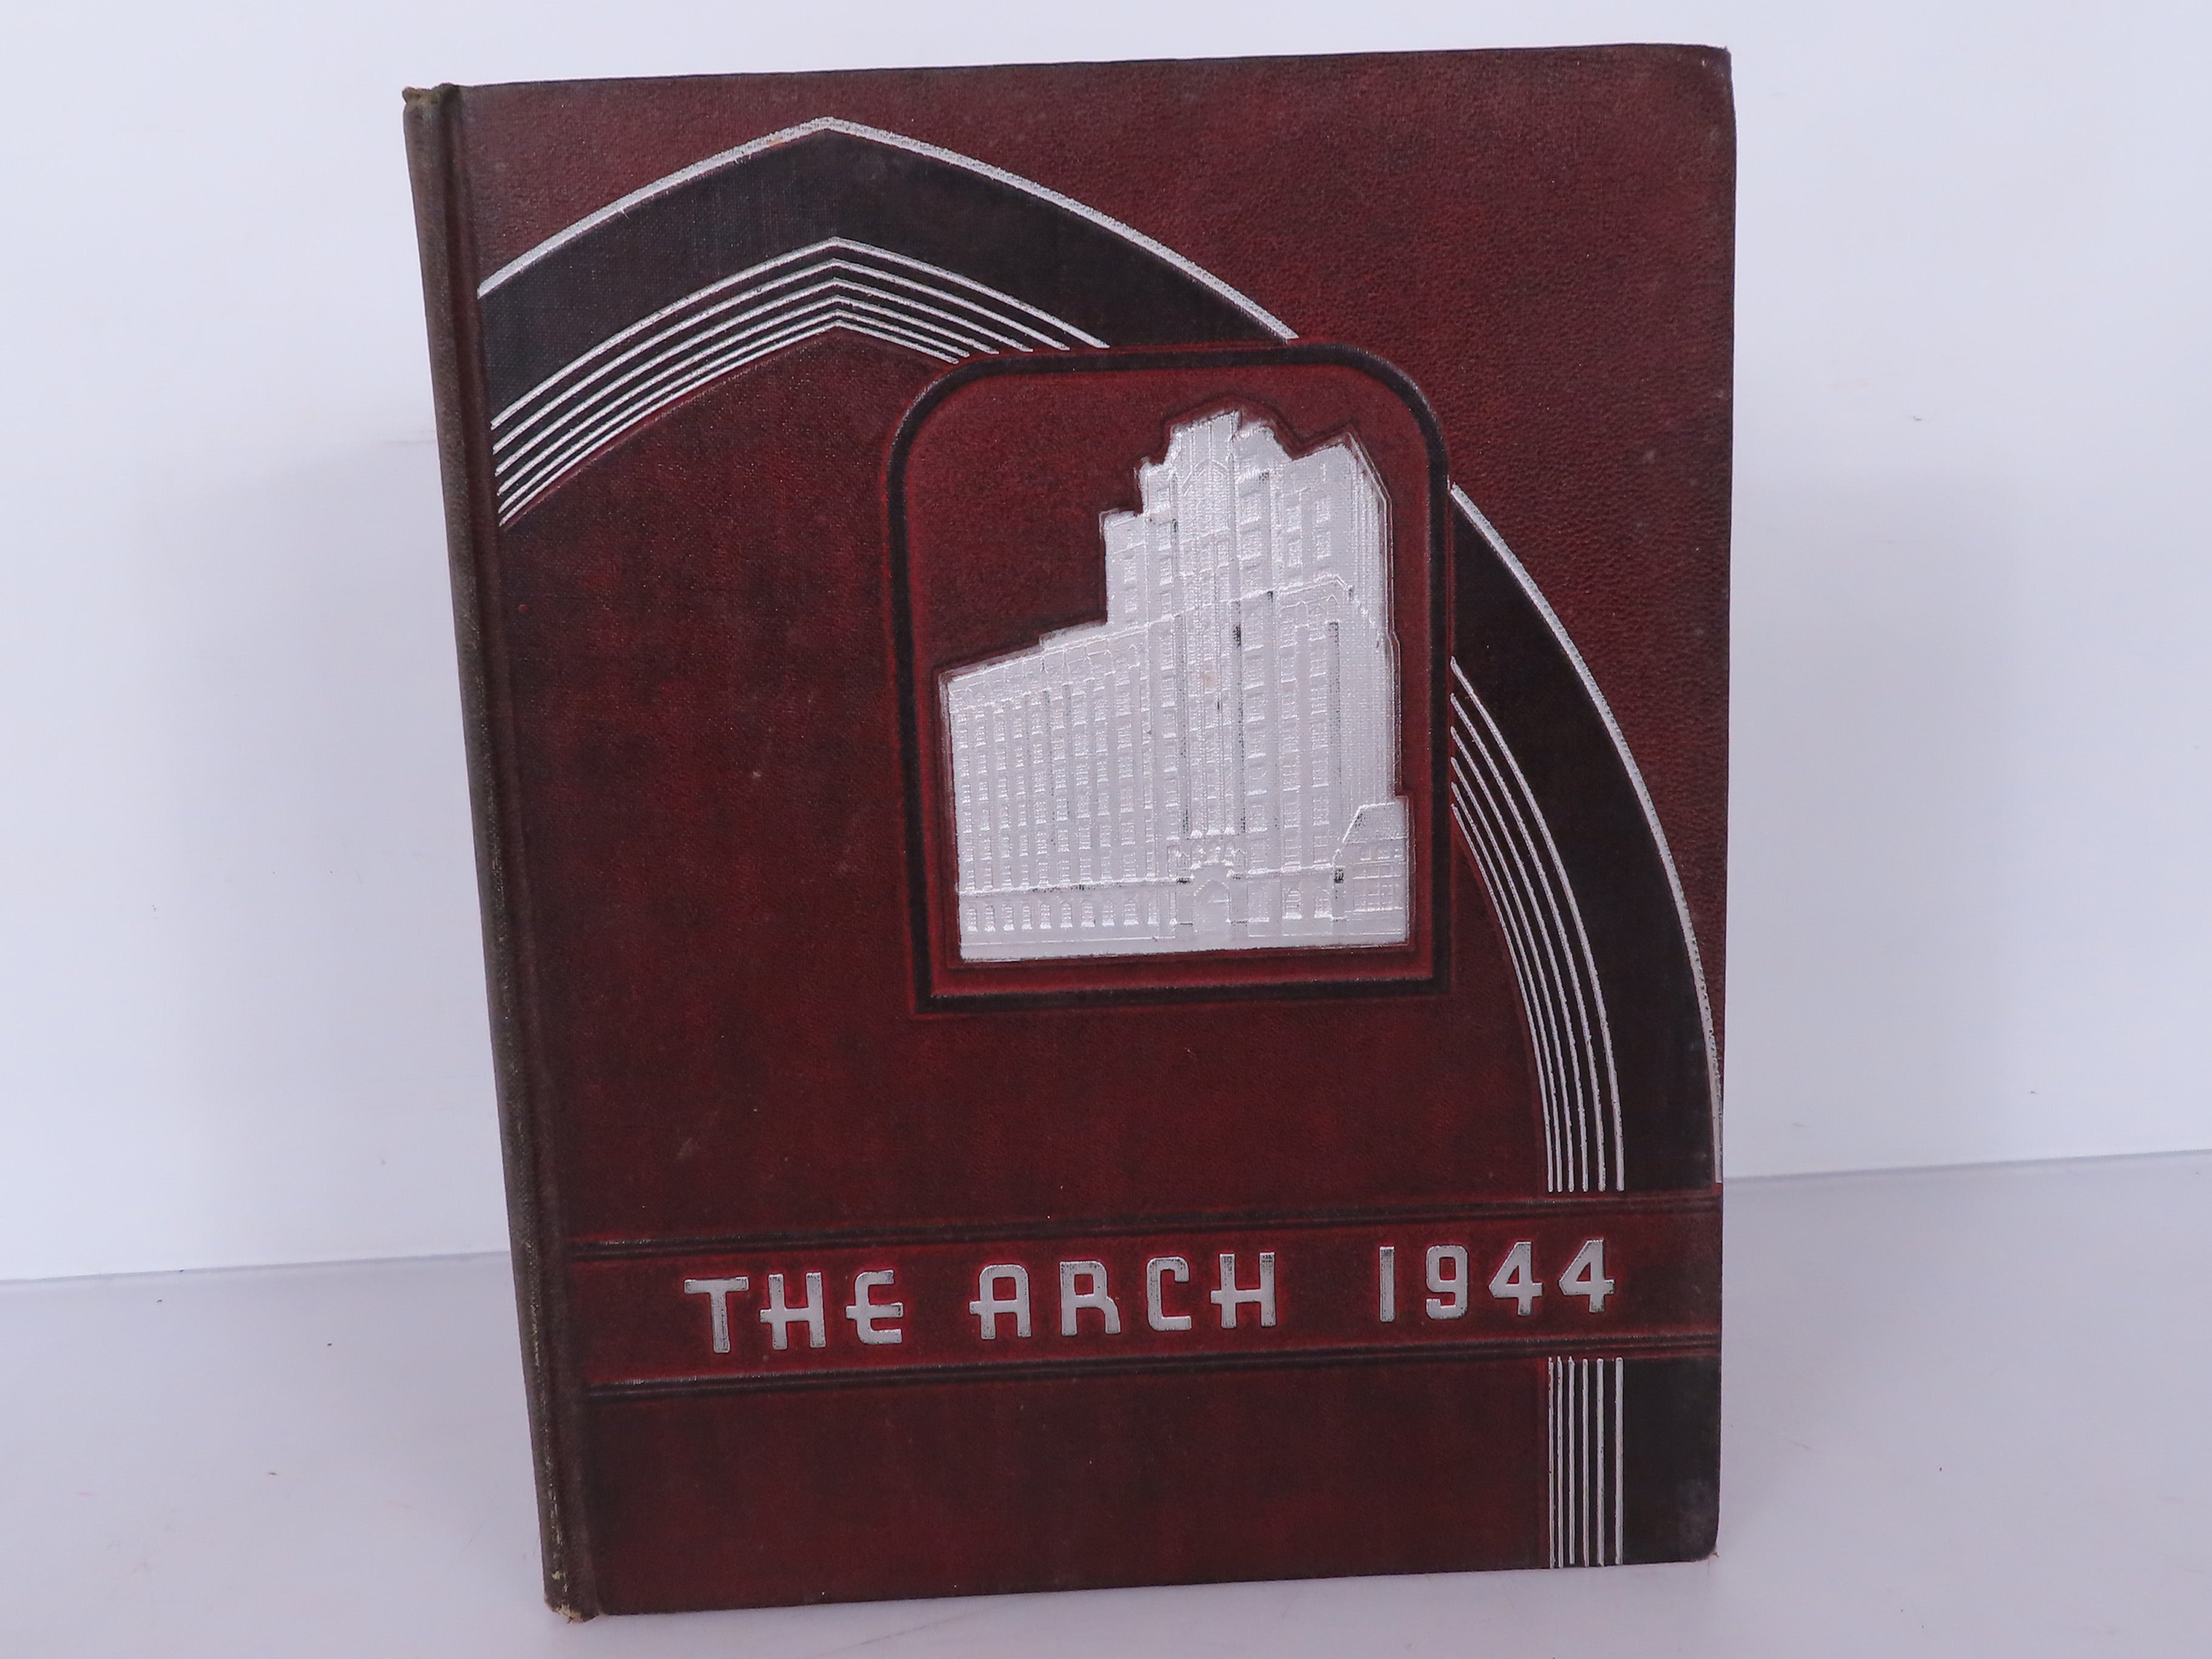 The Arch 1944 The Moody Bible Institute of Chicago Illinois